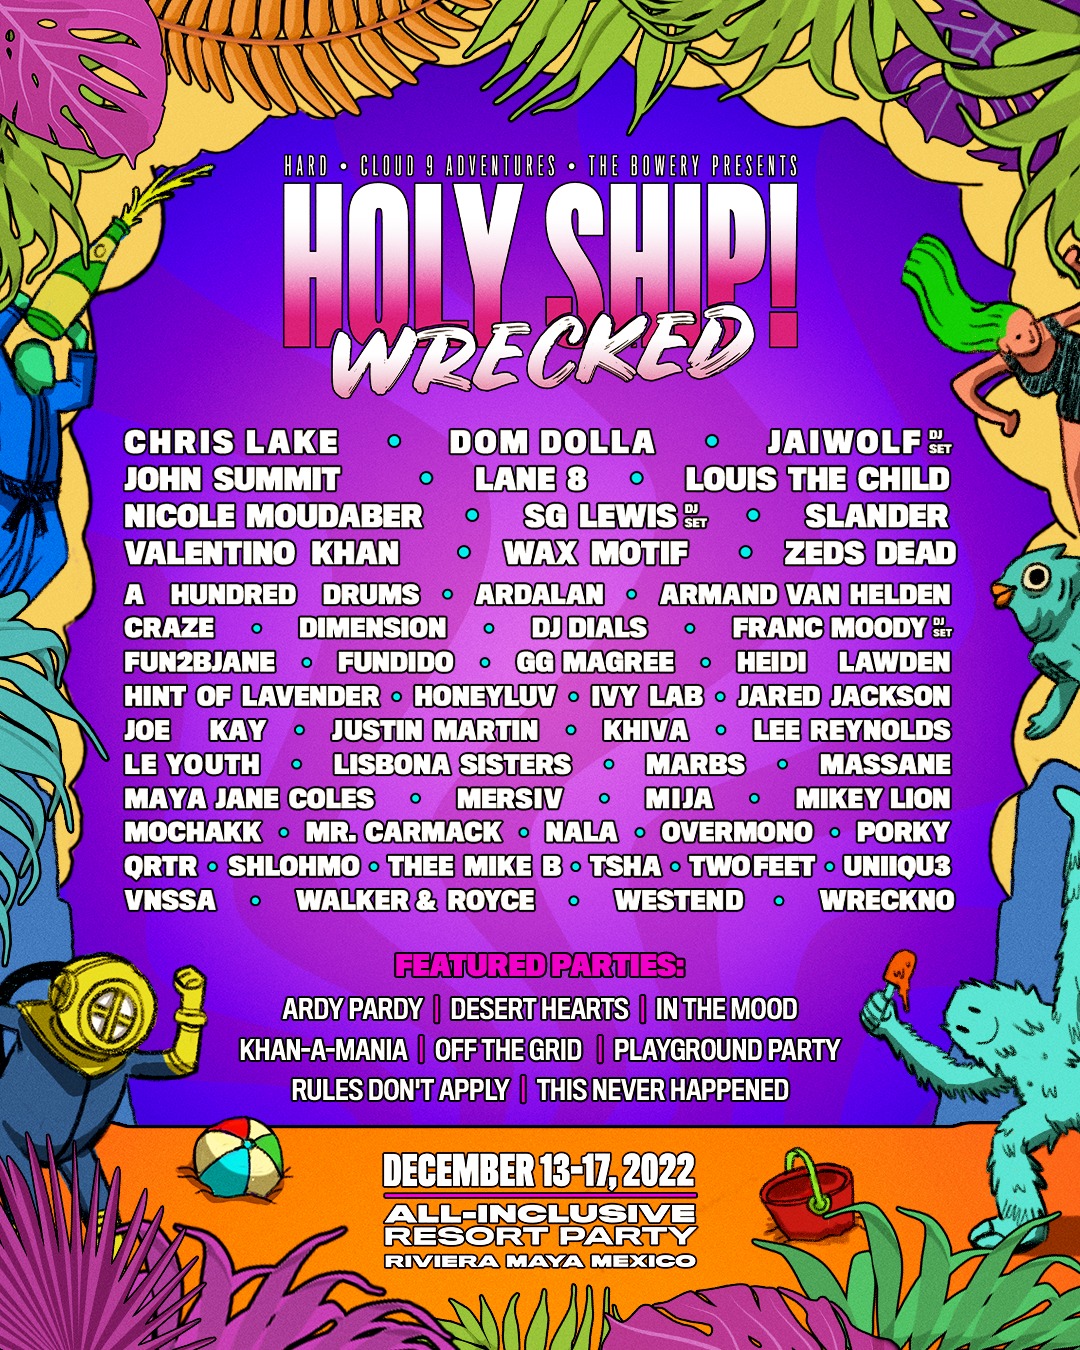 Holy Ship! Wrecked 2022 Lineup | Grooveist